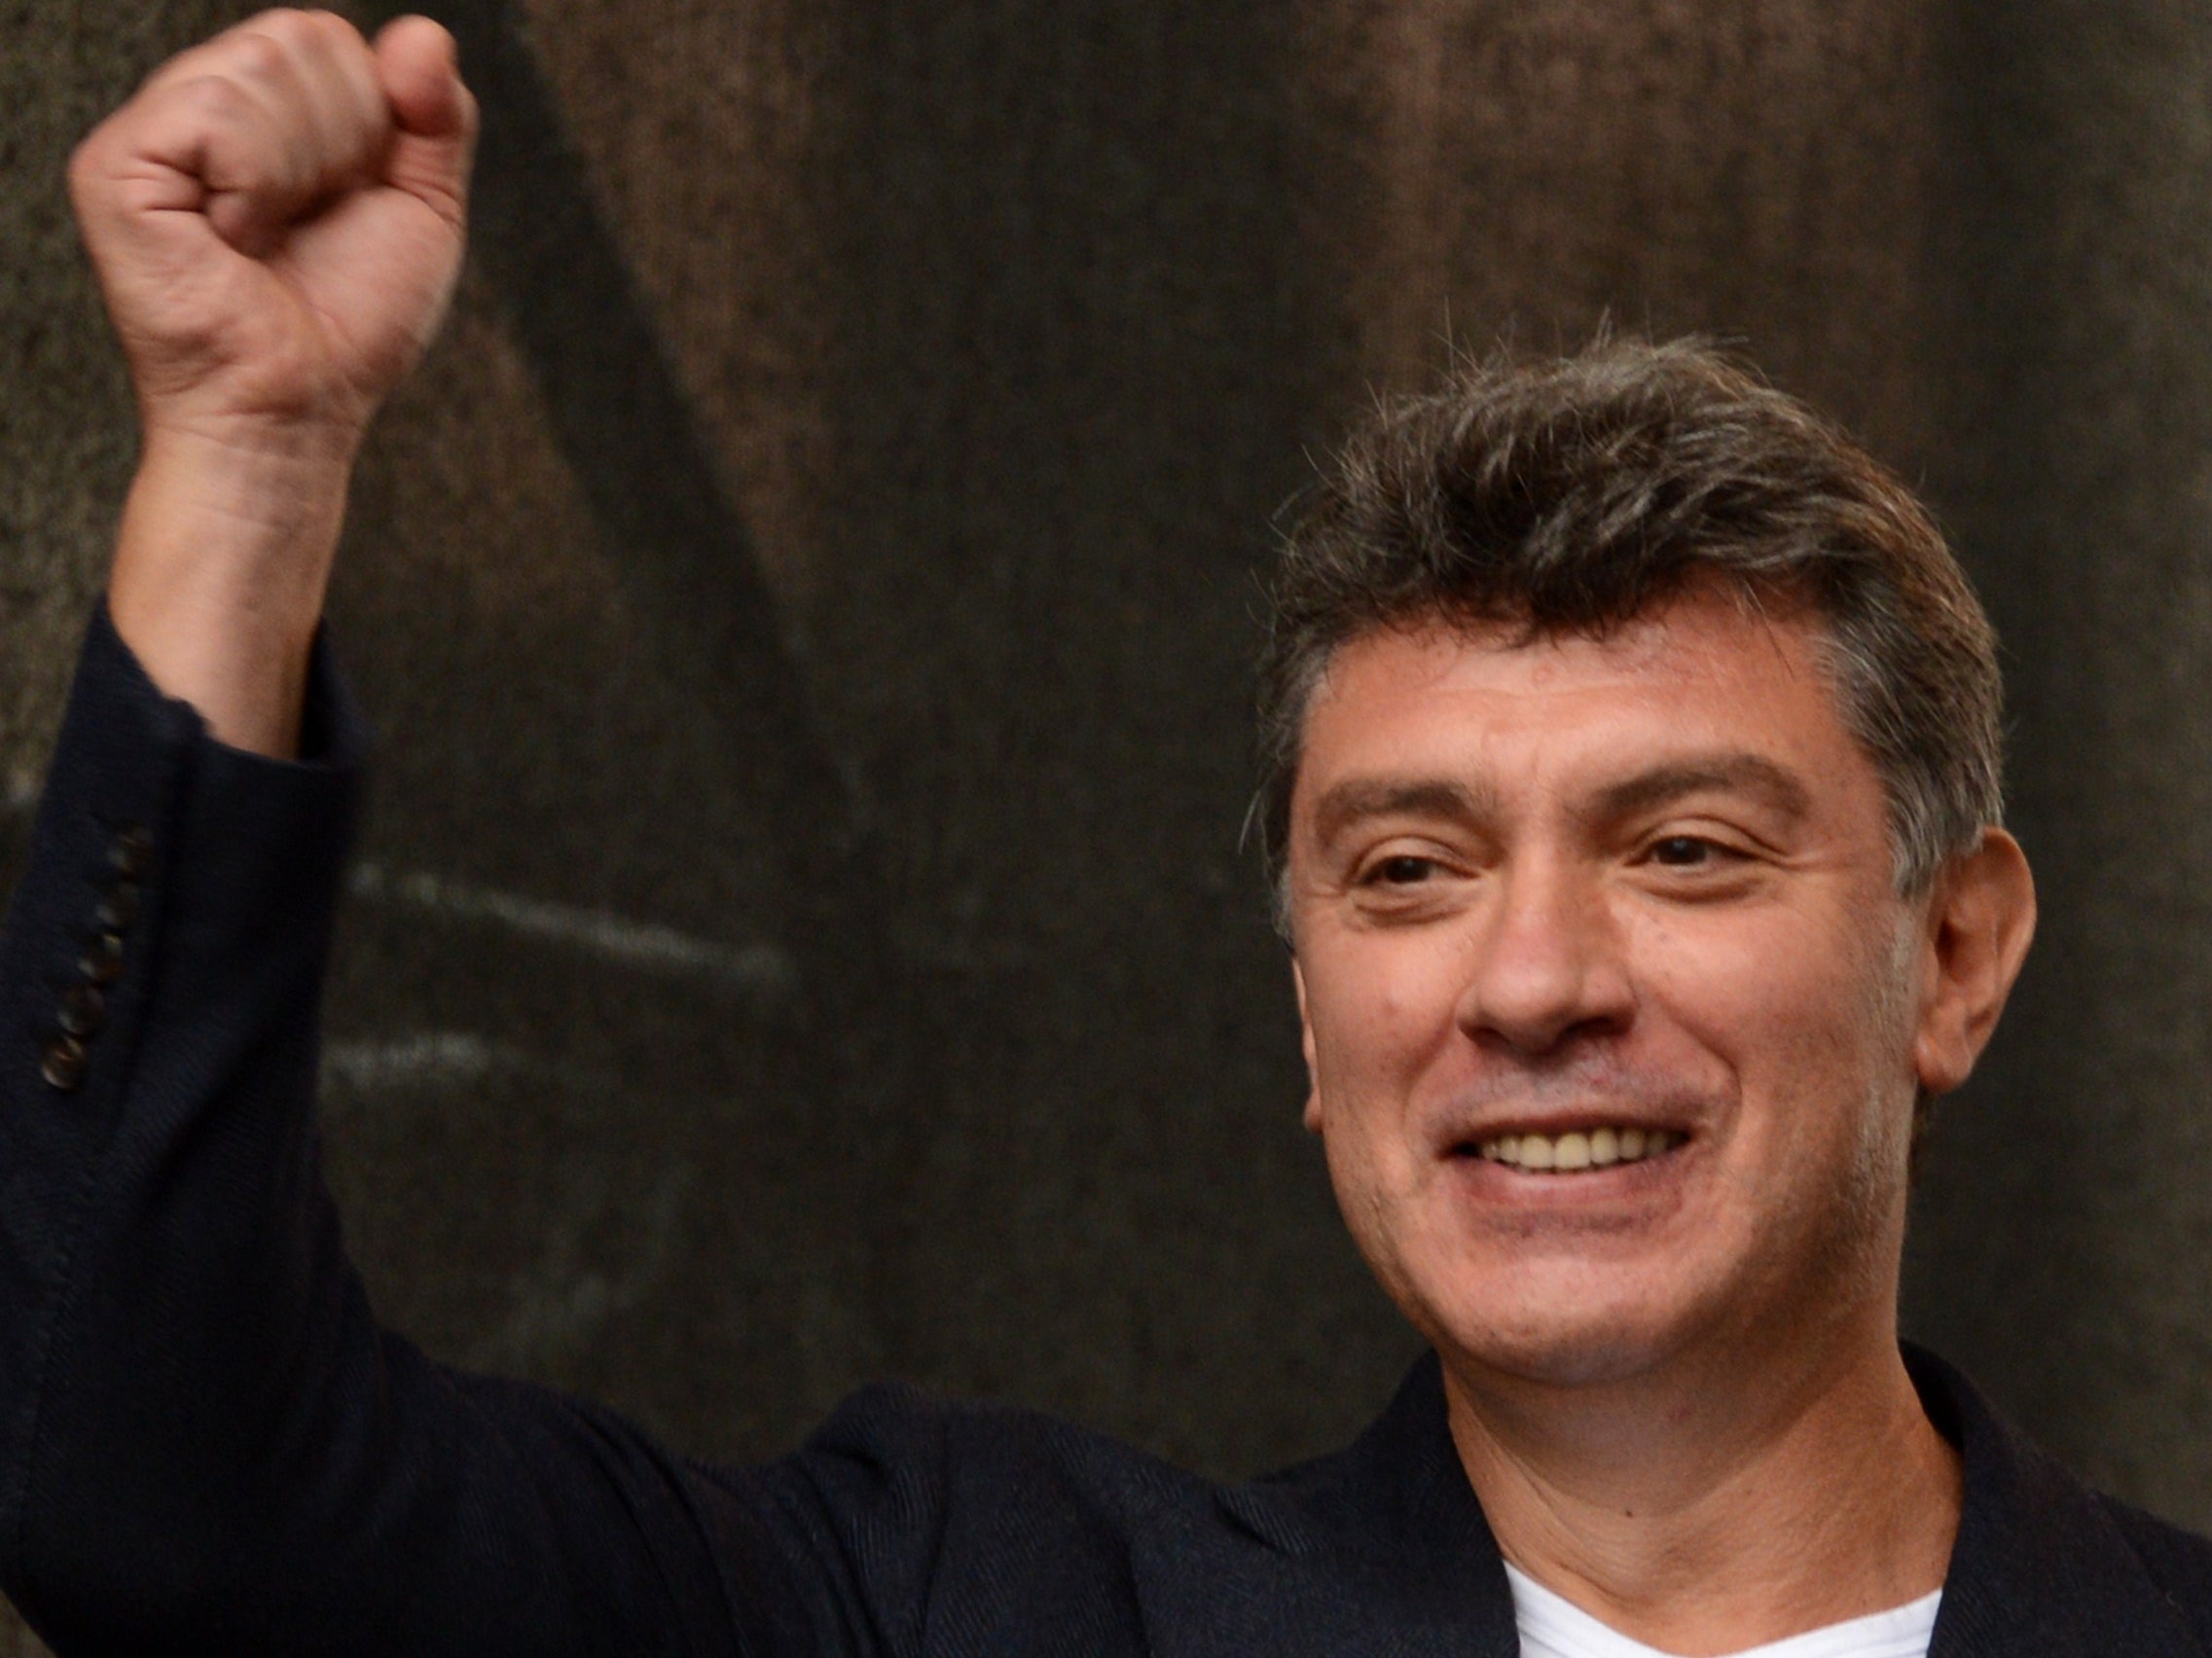 Boris Nemtsov gestures during an anti-Vladimir Putin protest in central in Moscow on 15 September 2012